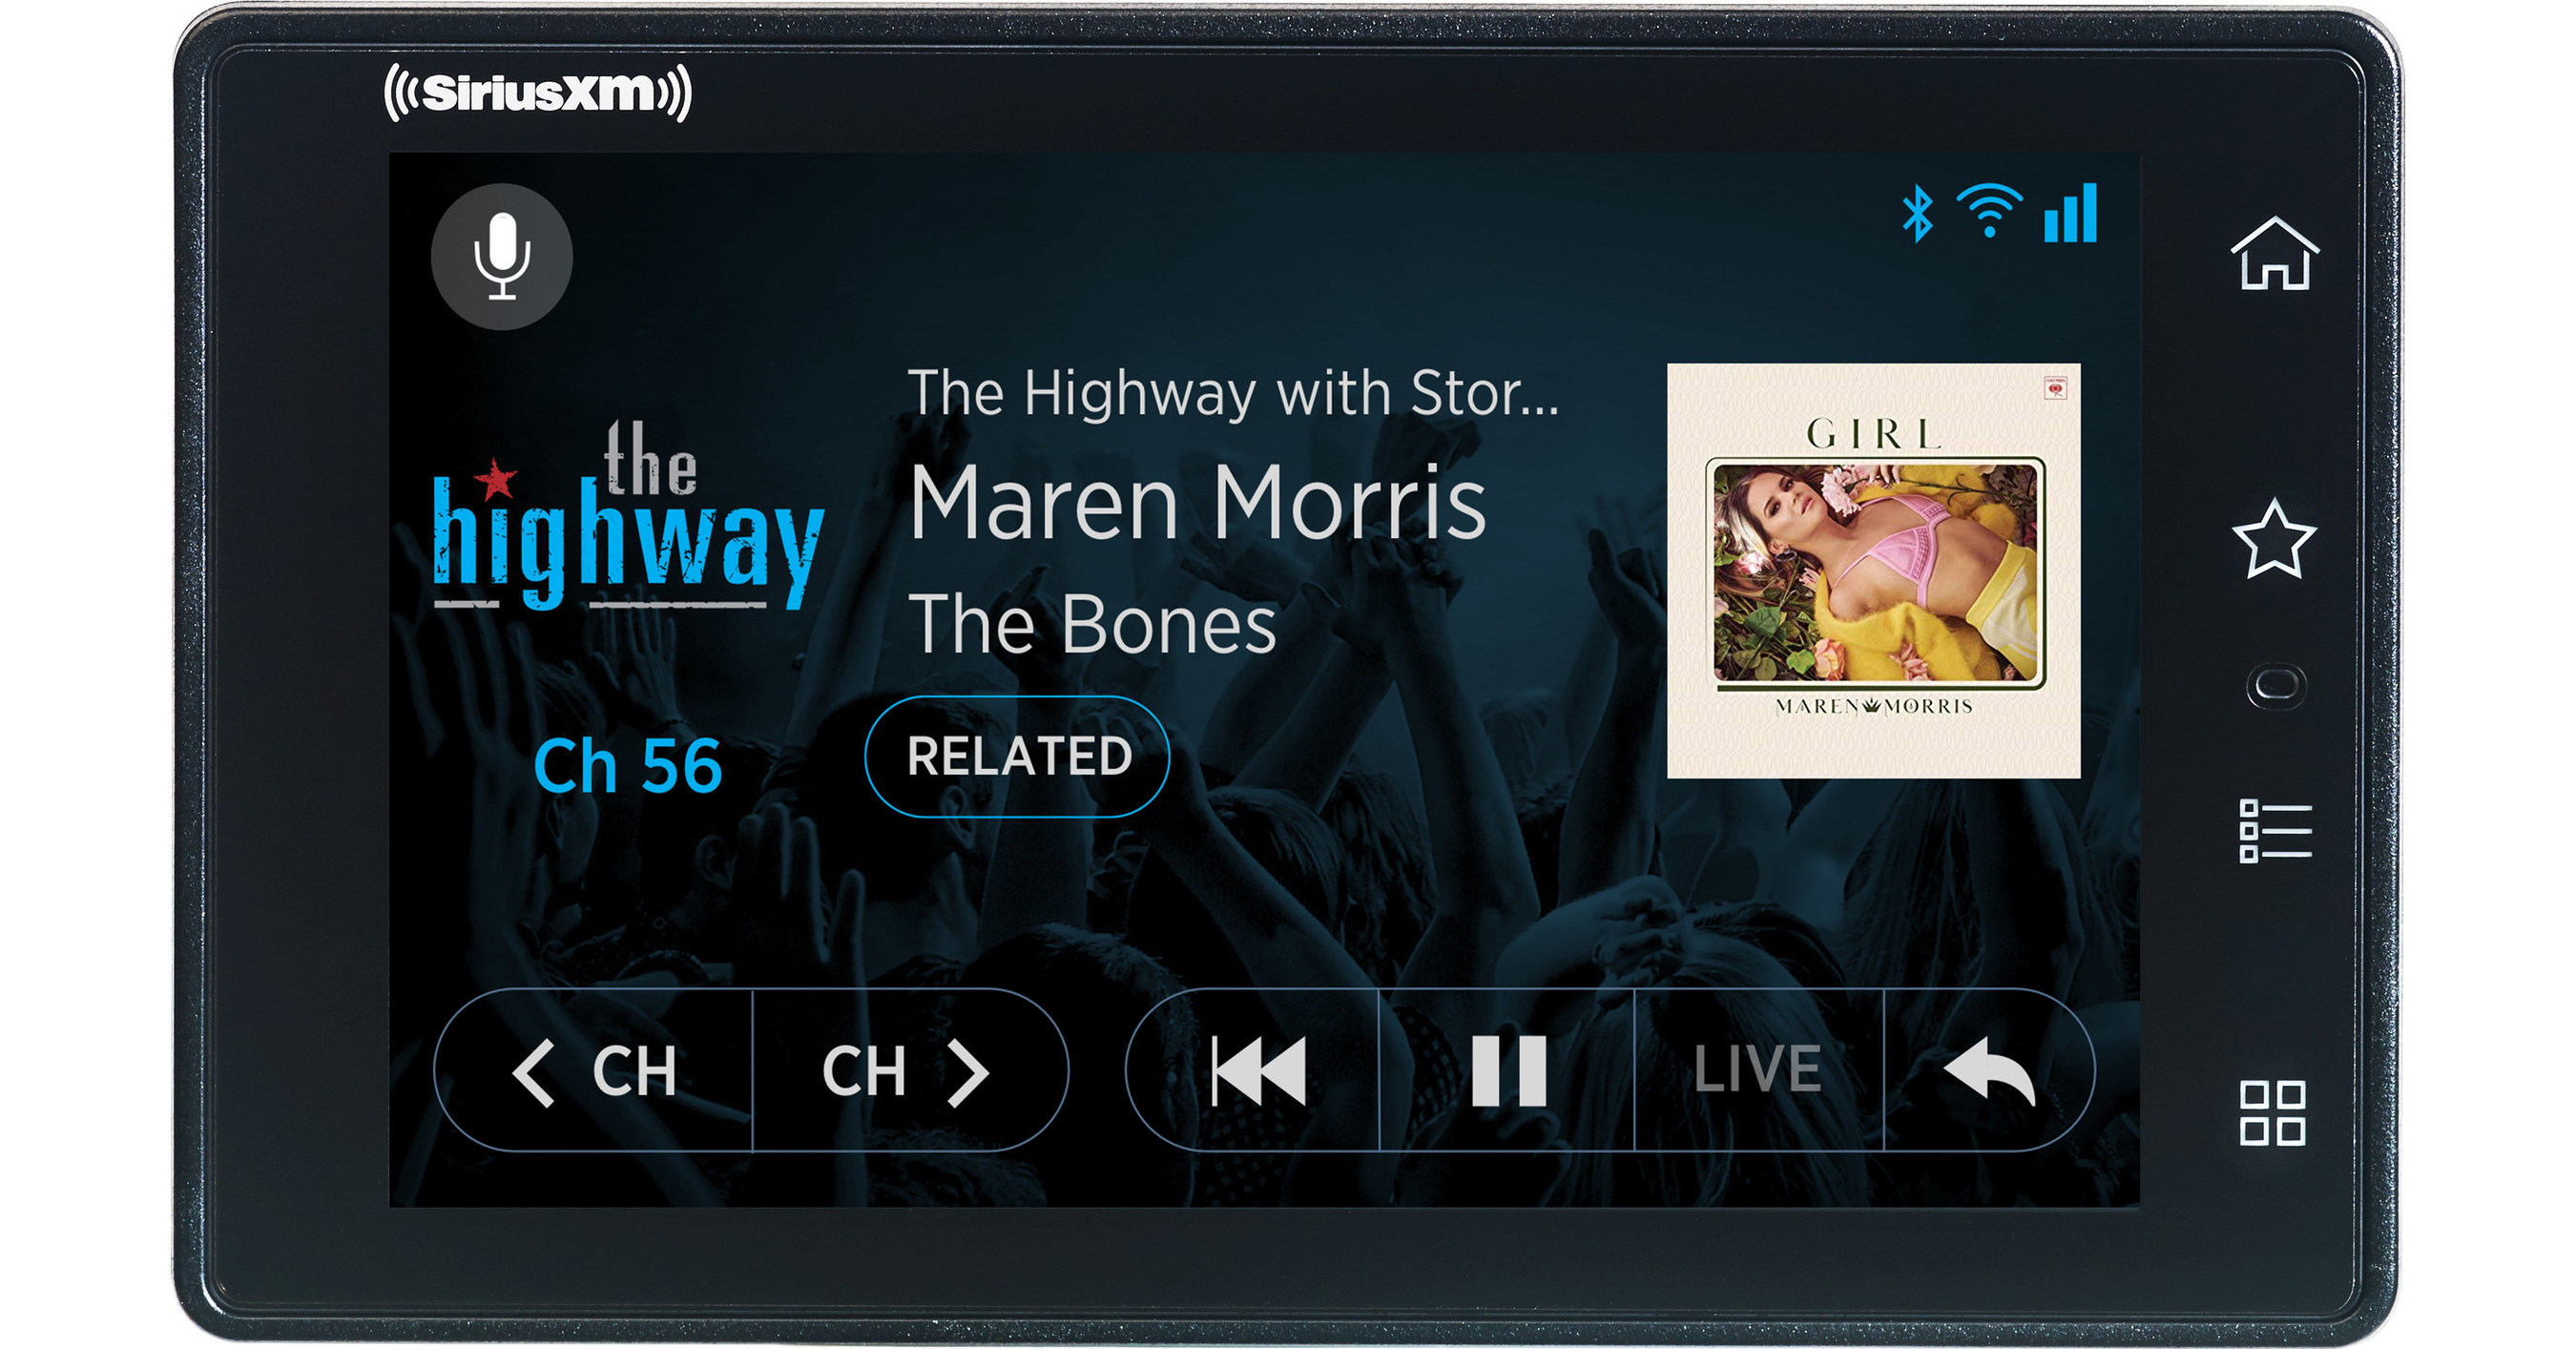 Does siriusxm work without internet?